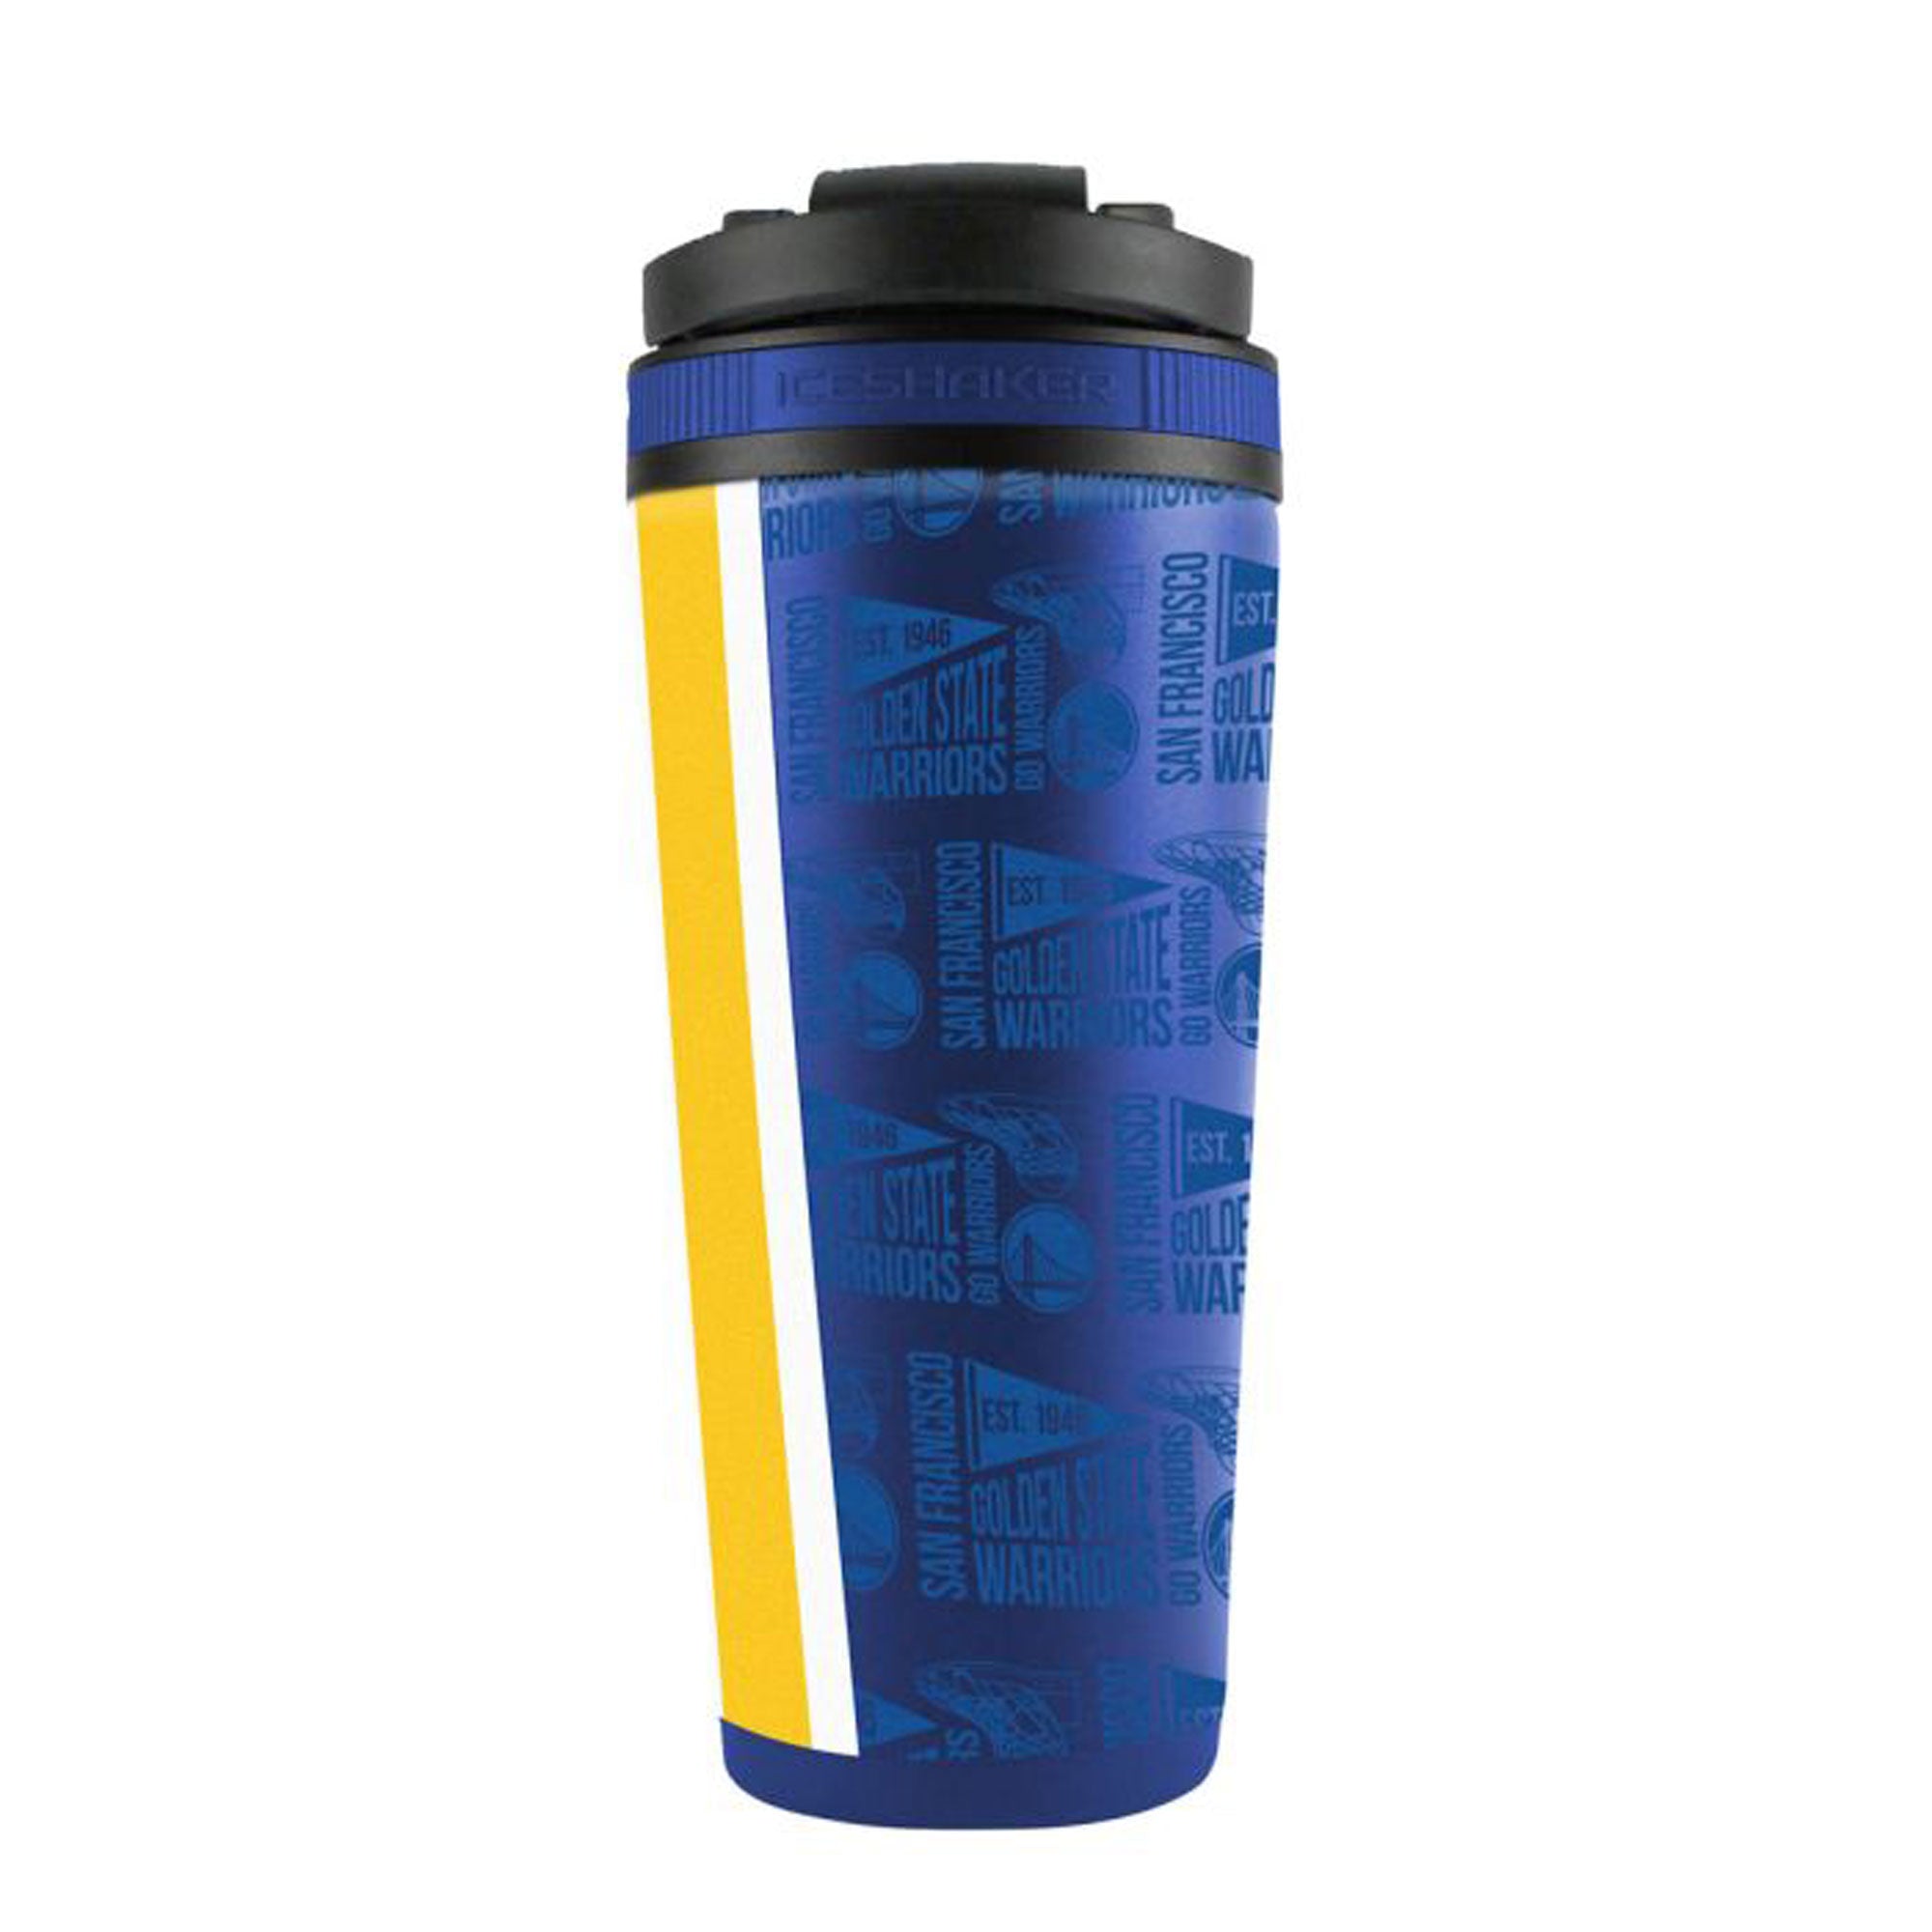 Officially Licensed Golden State Warriors 4D Ice Shaker